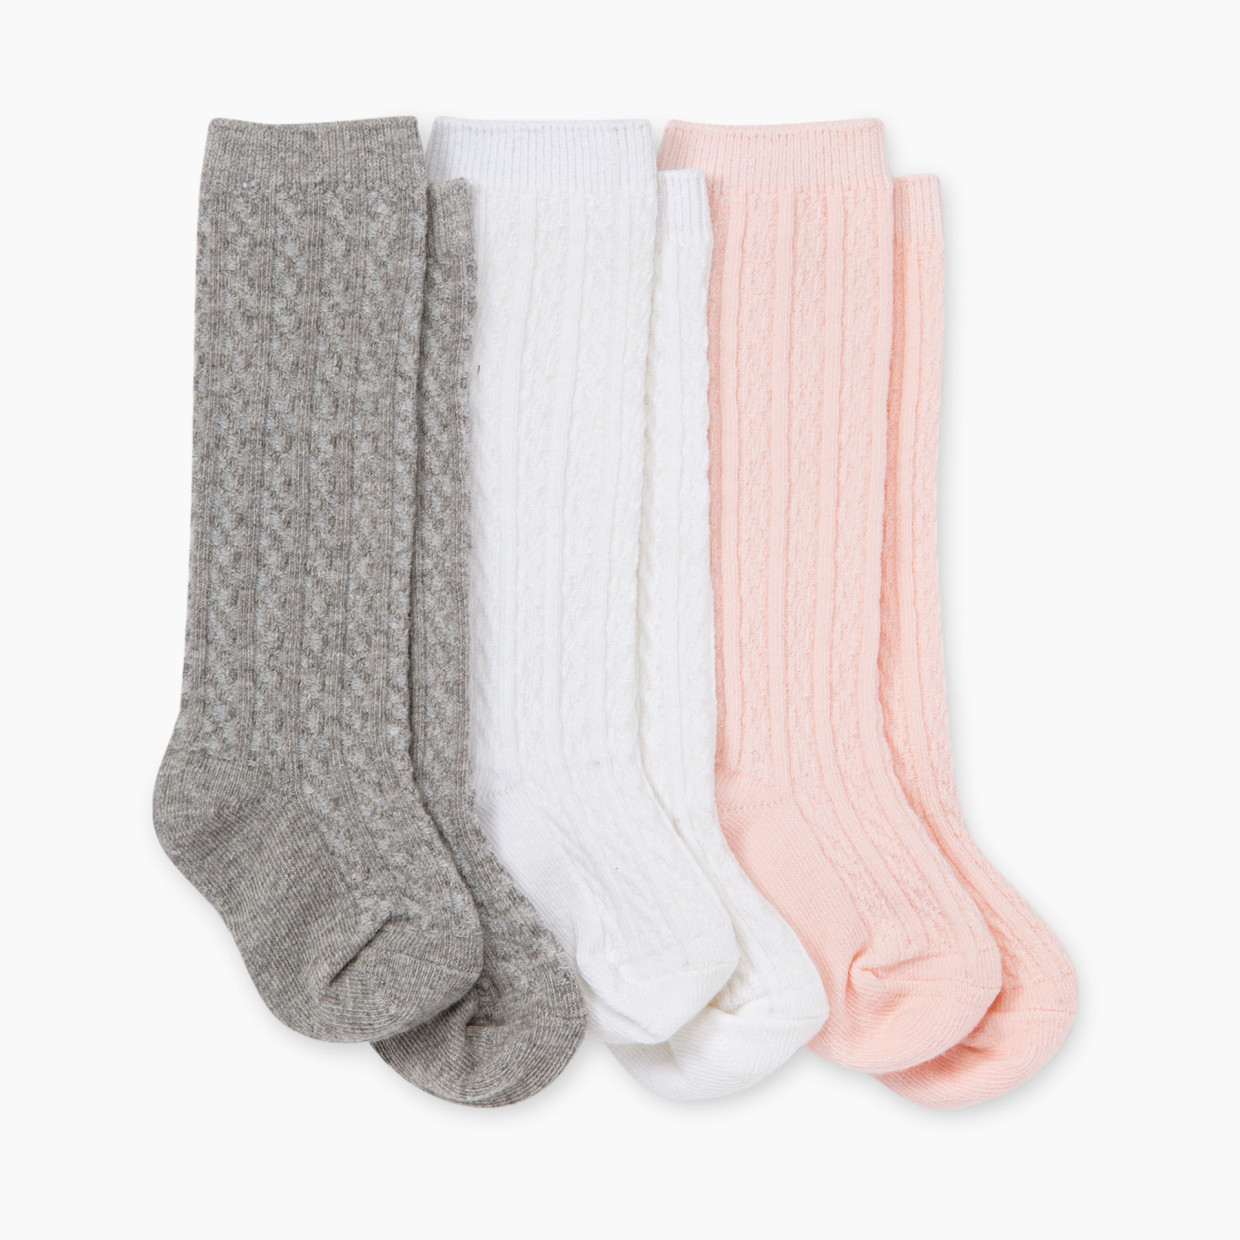 Burt's Bees Baby Cable Knit Knee-High Socks (3 Pack) - Multi, 12-24 Months.